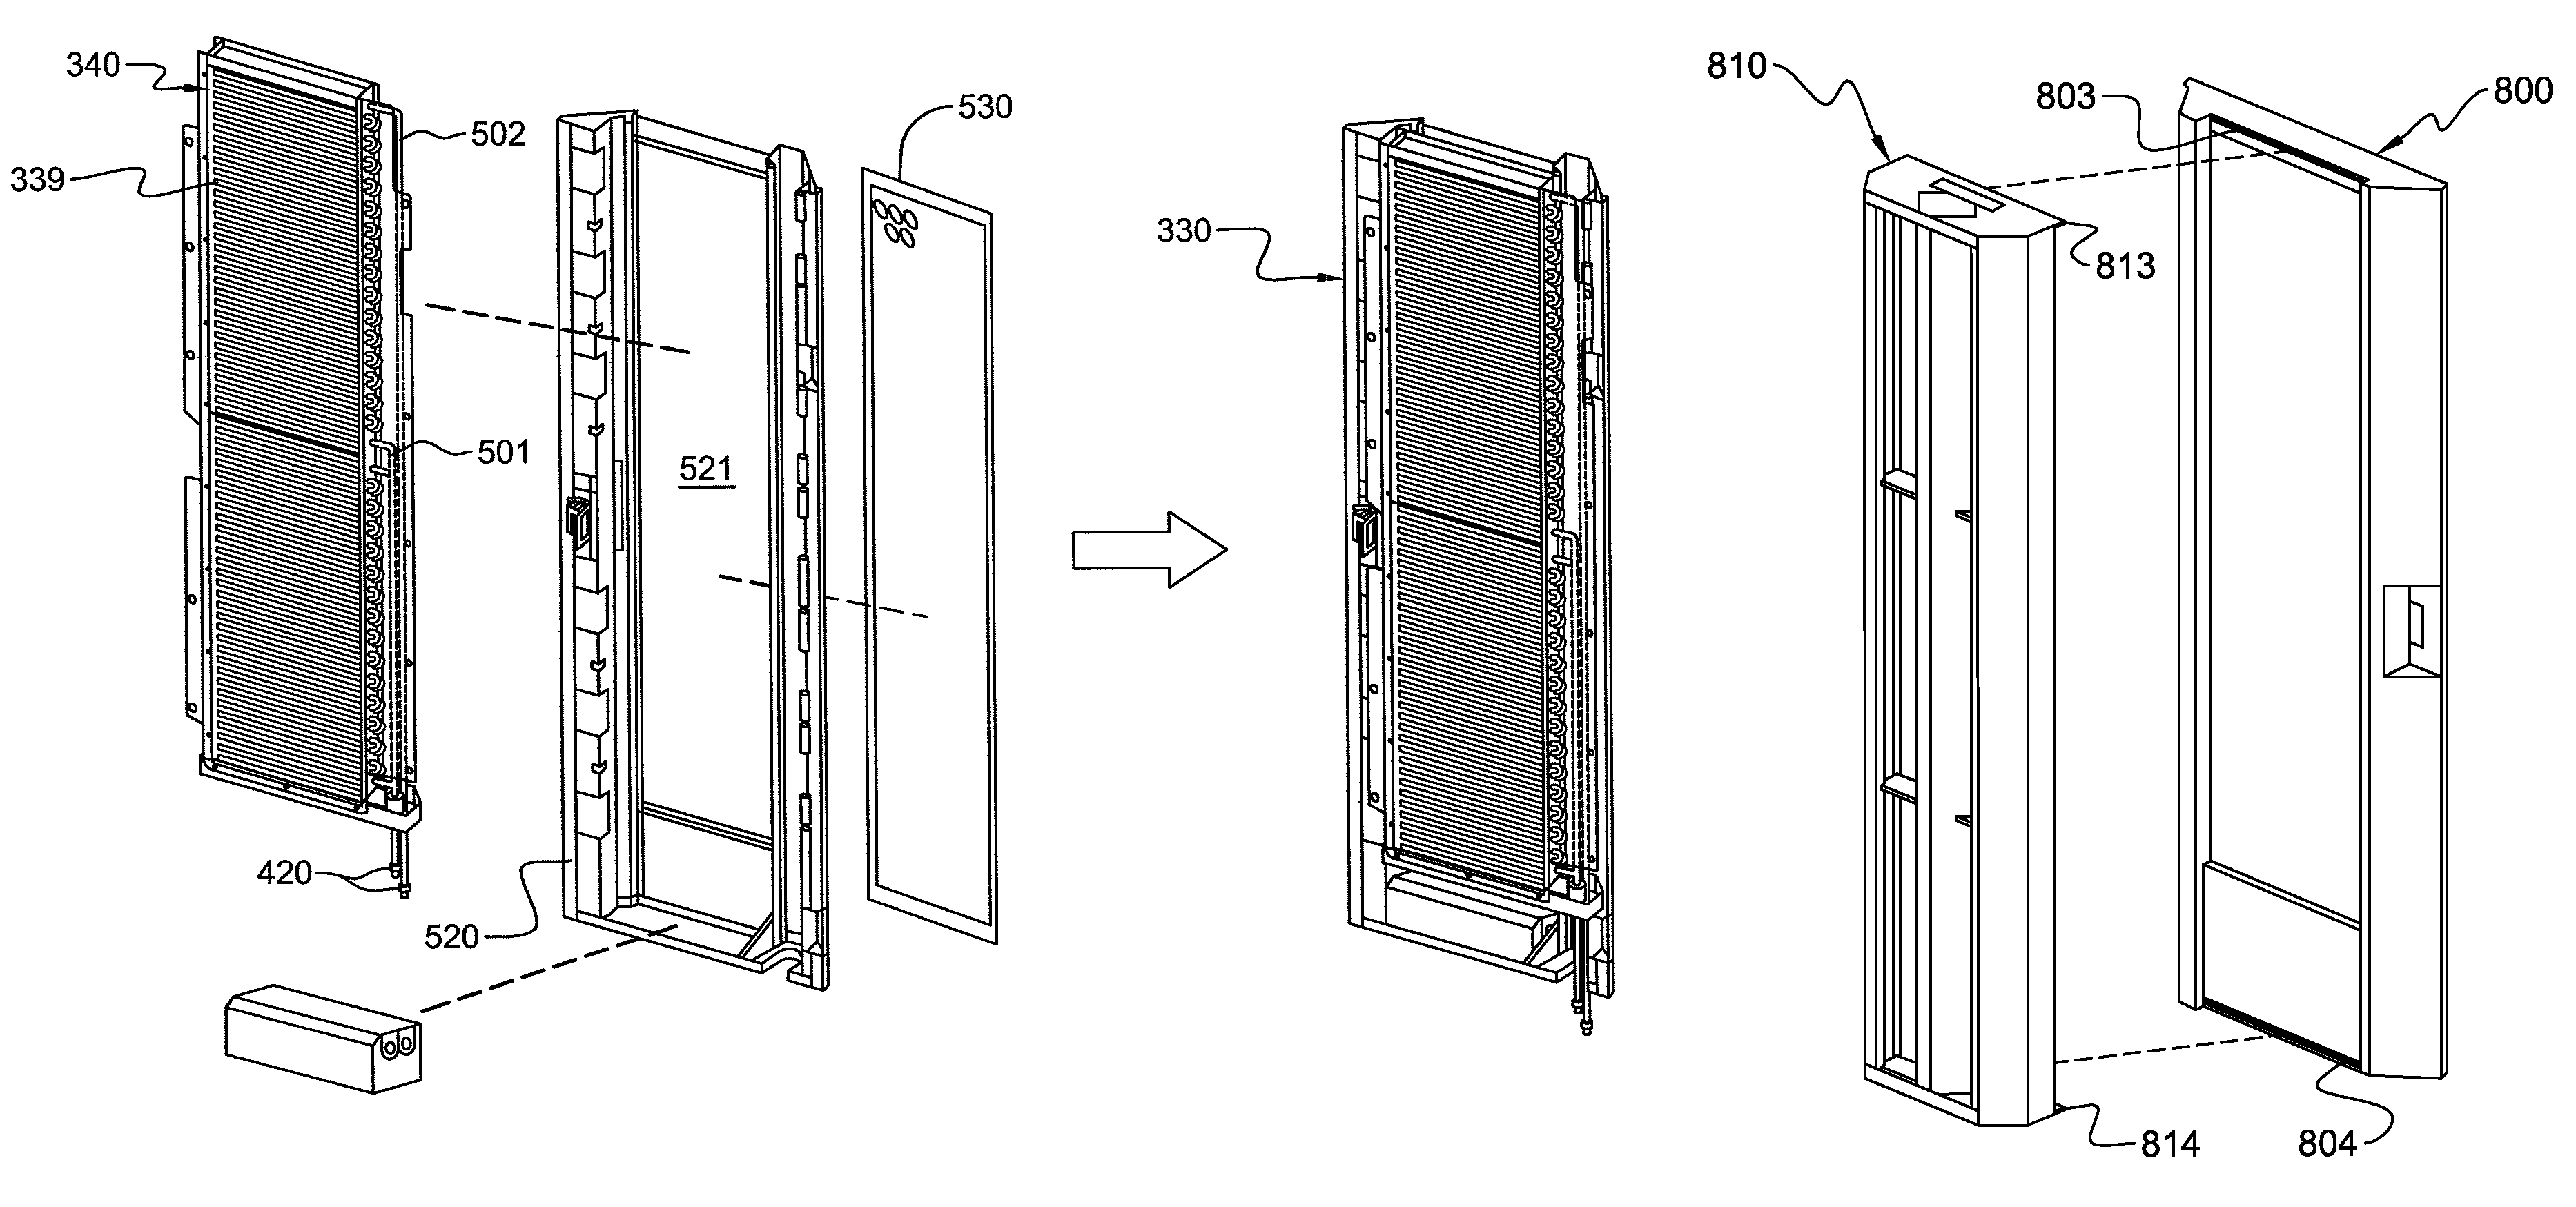 Noise-reducing attachment apparatus for heat exchanger door of an electronics rack of a data center